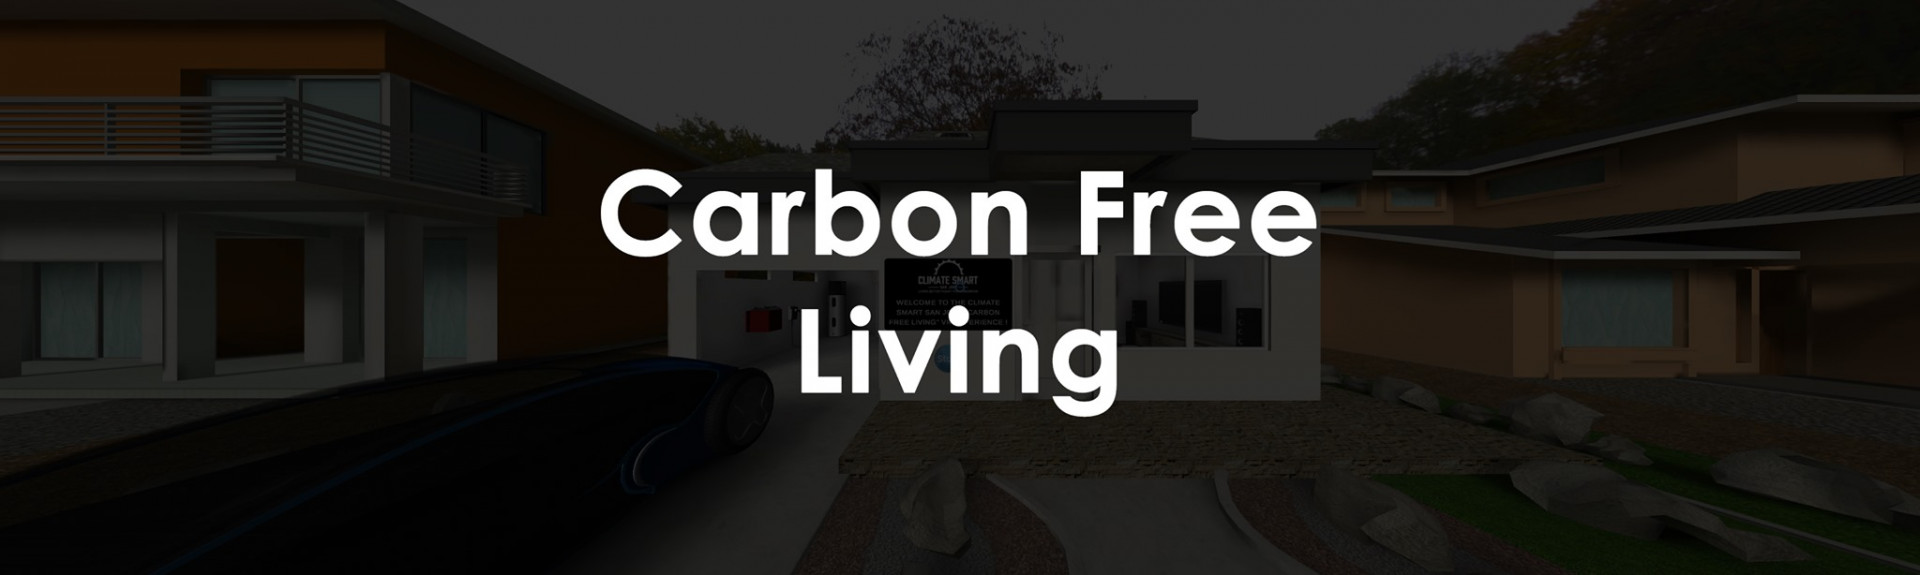 Carbon Free Living